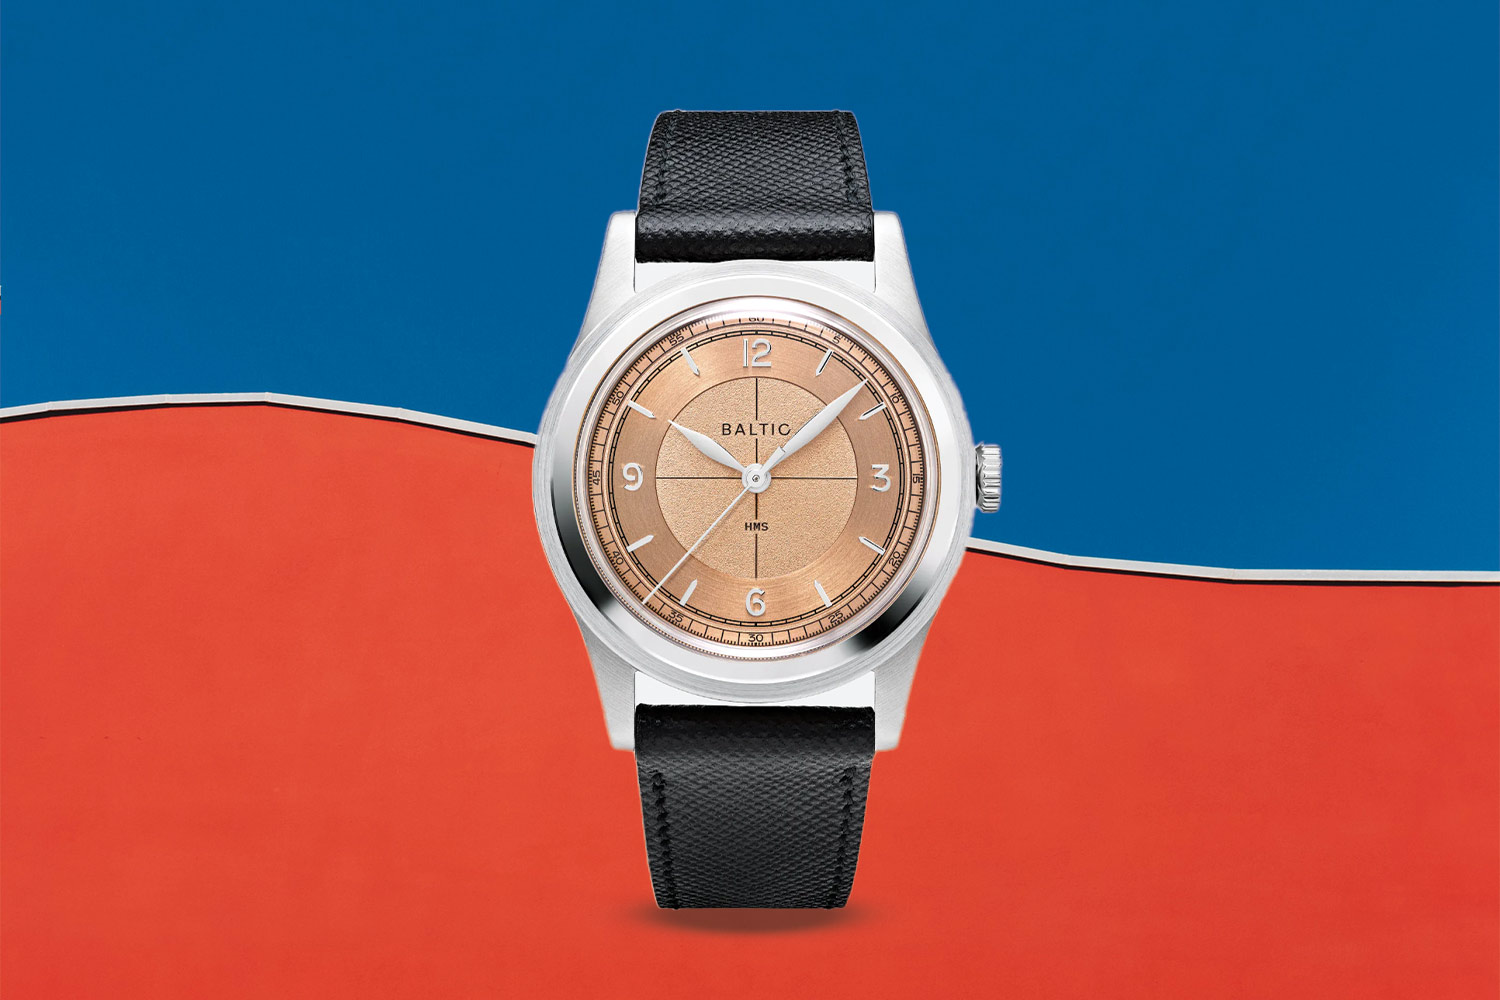 Silver, black and salmon-colored watch